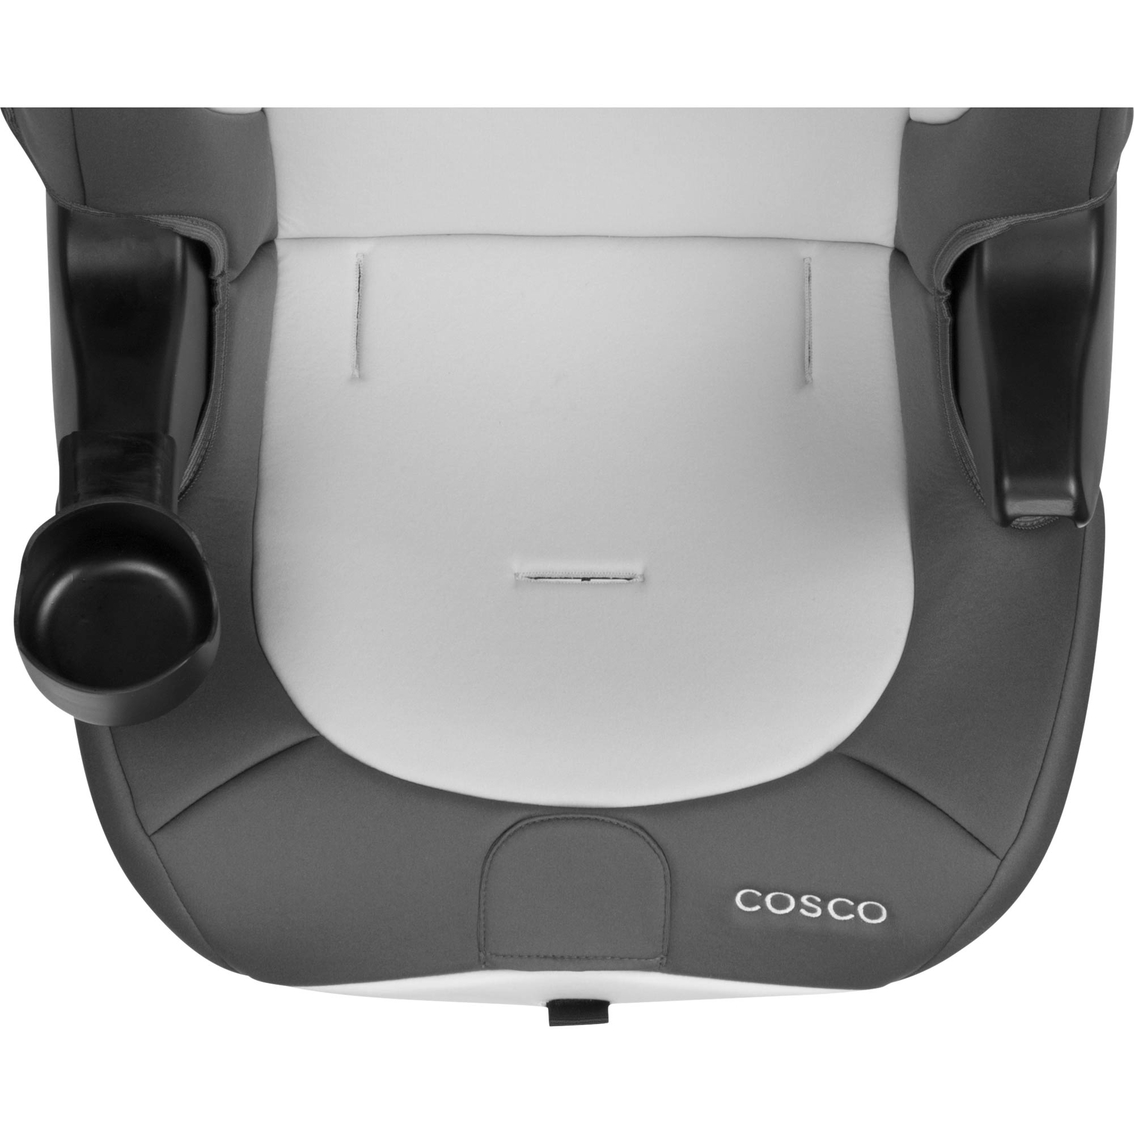 Cosco Finale DX 2 In 1 Booster Car Seat - Image 4 of 4